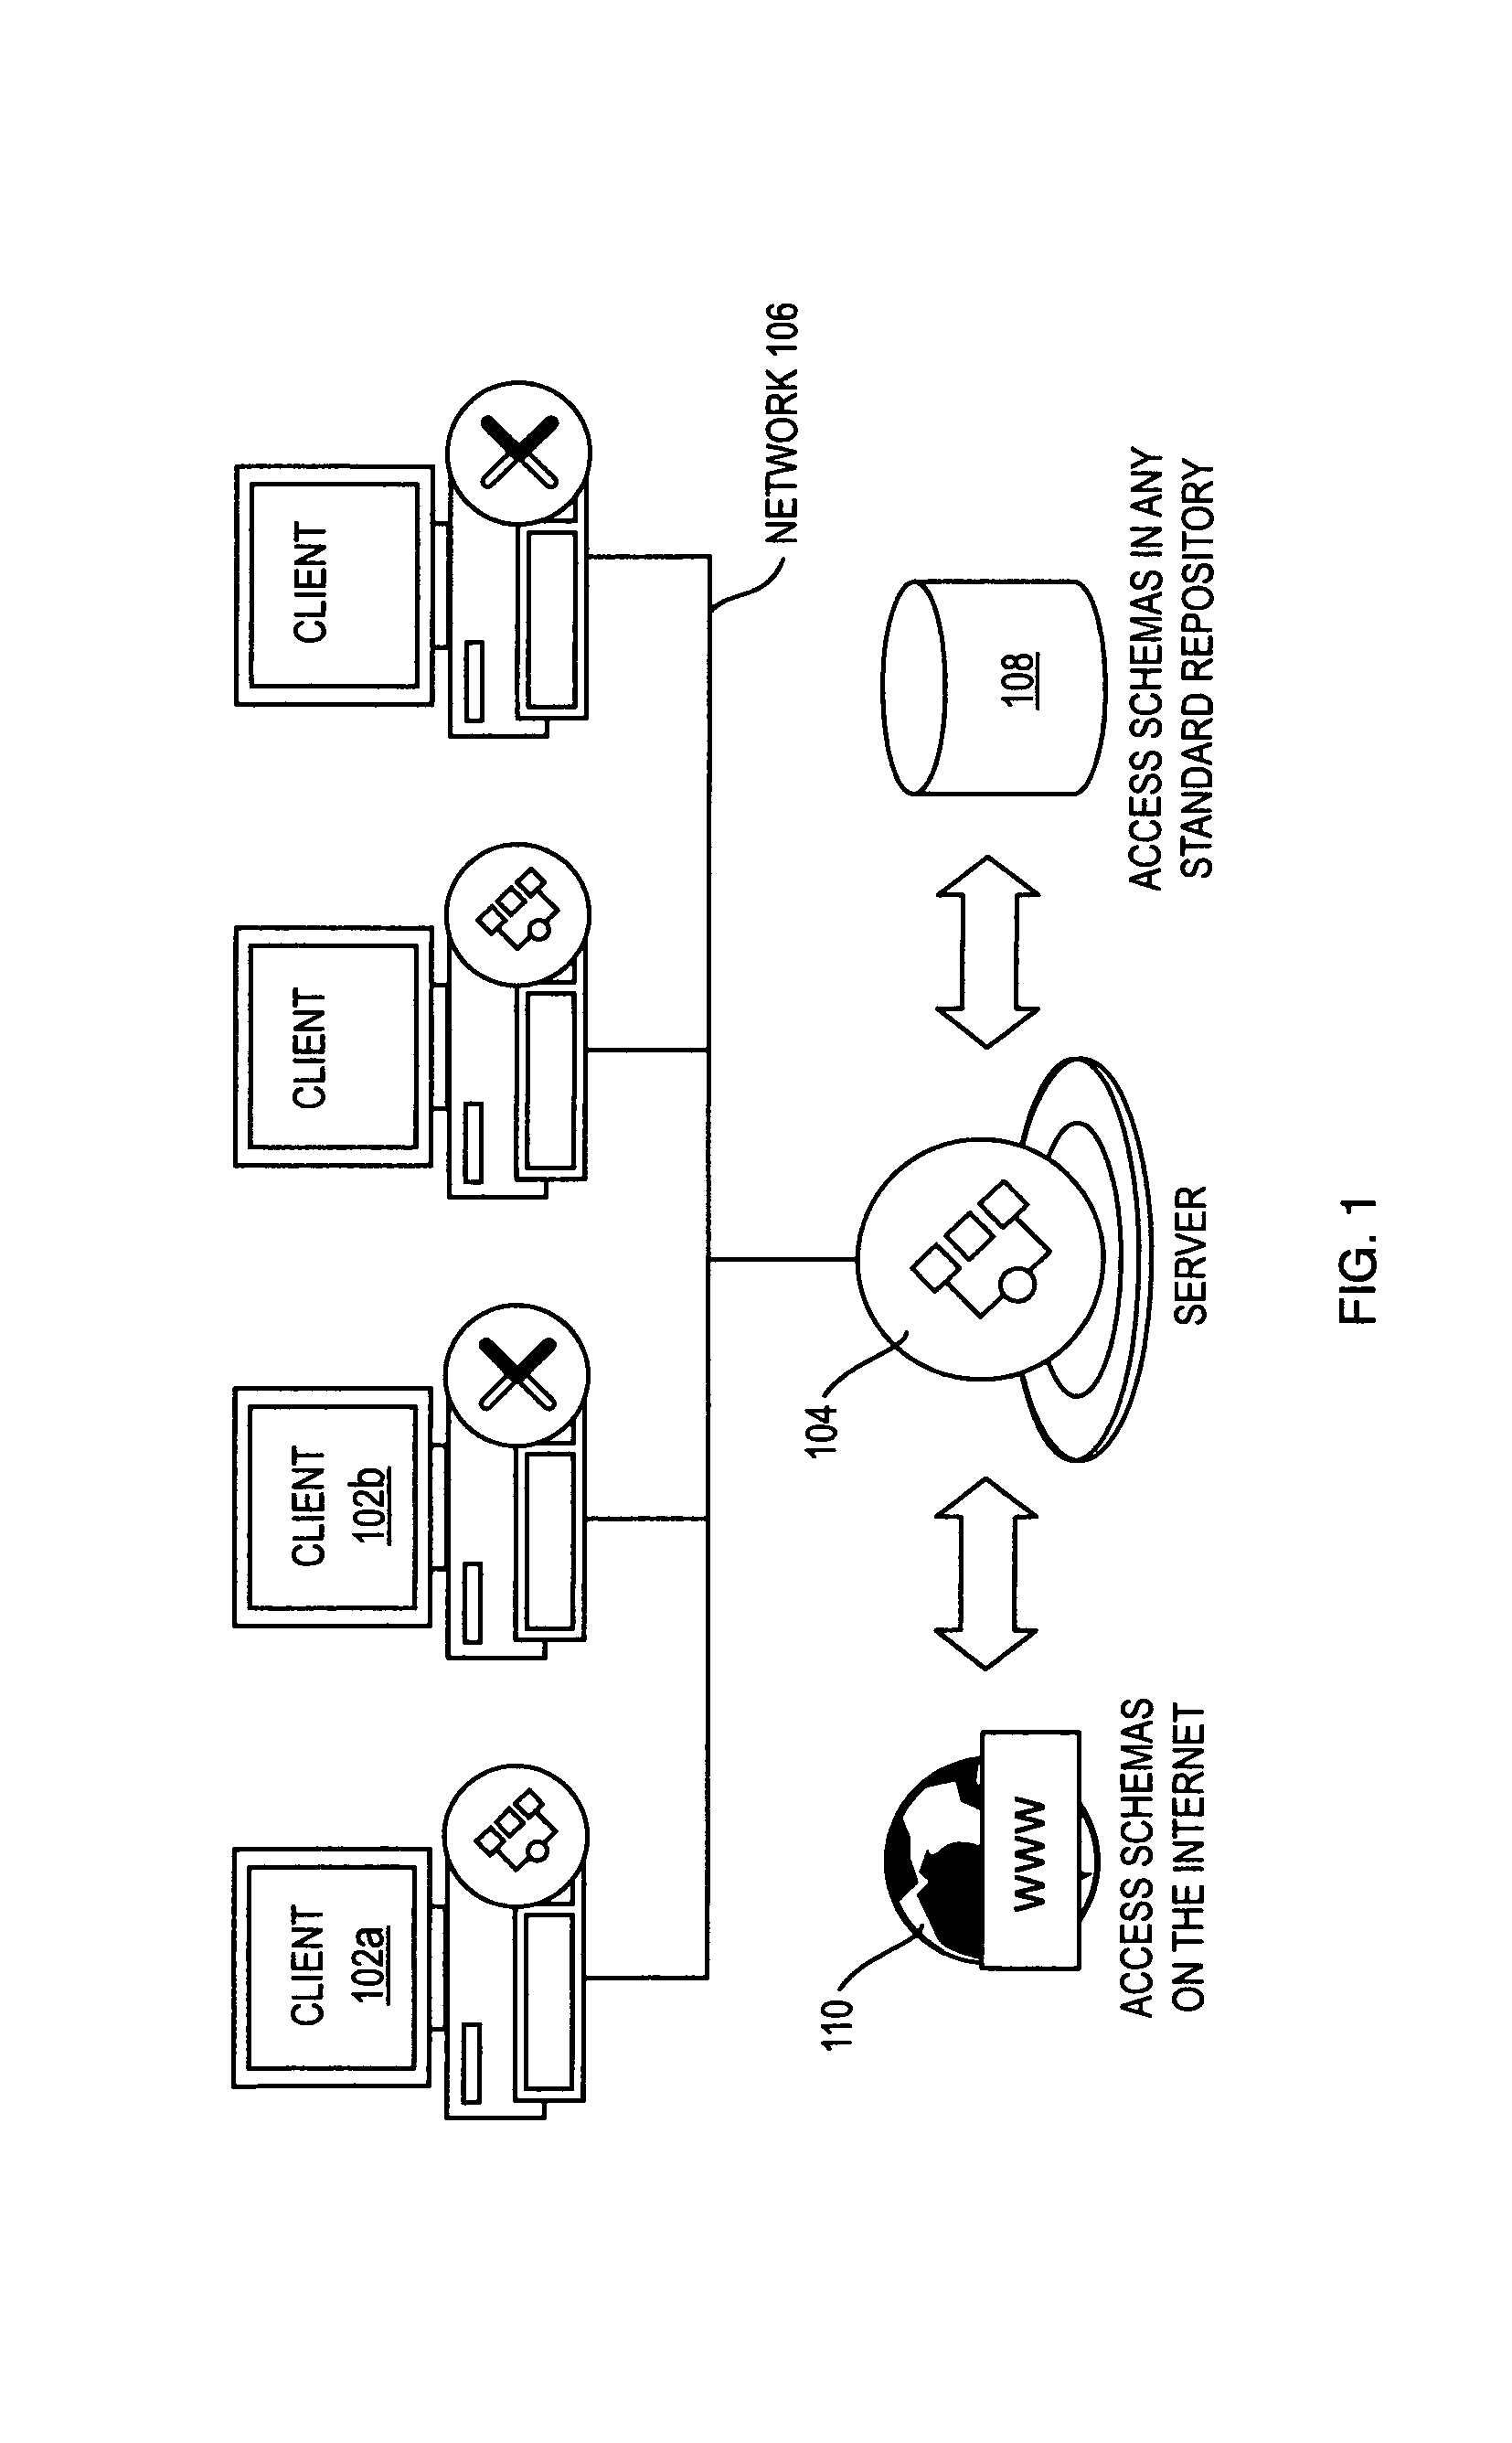 System and method for modeling and managing enterprise architecture data and content models and their relationships